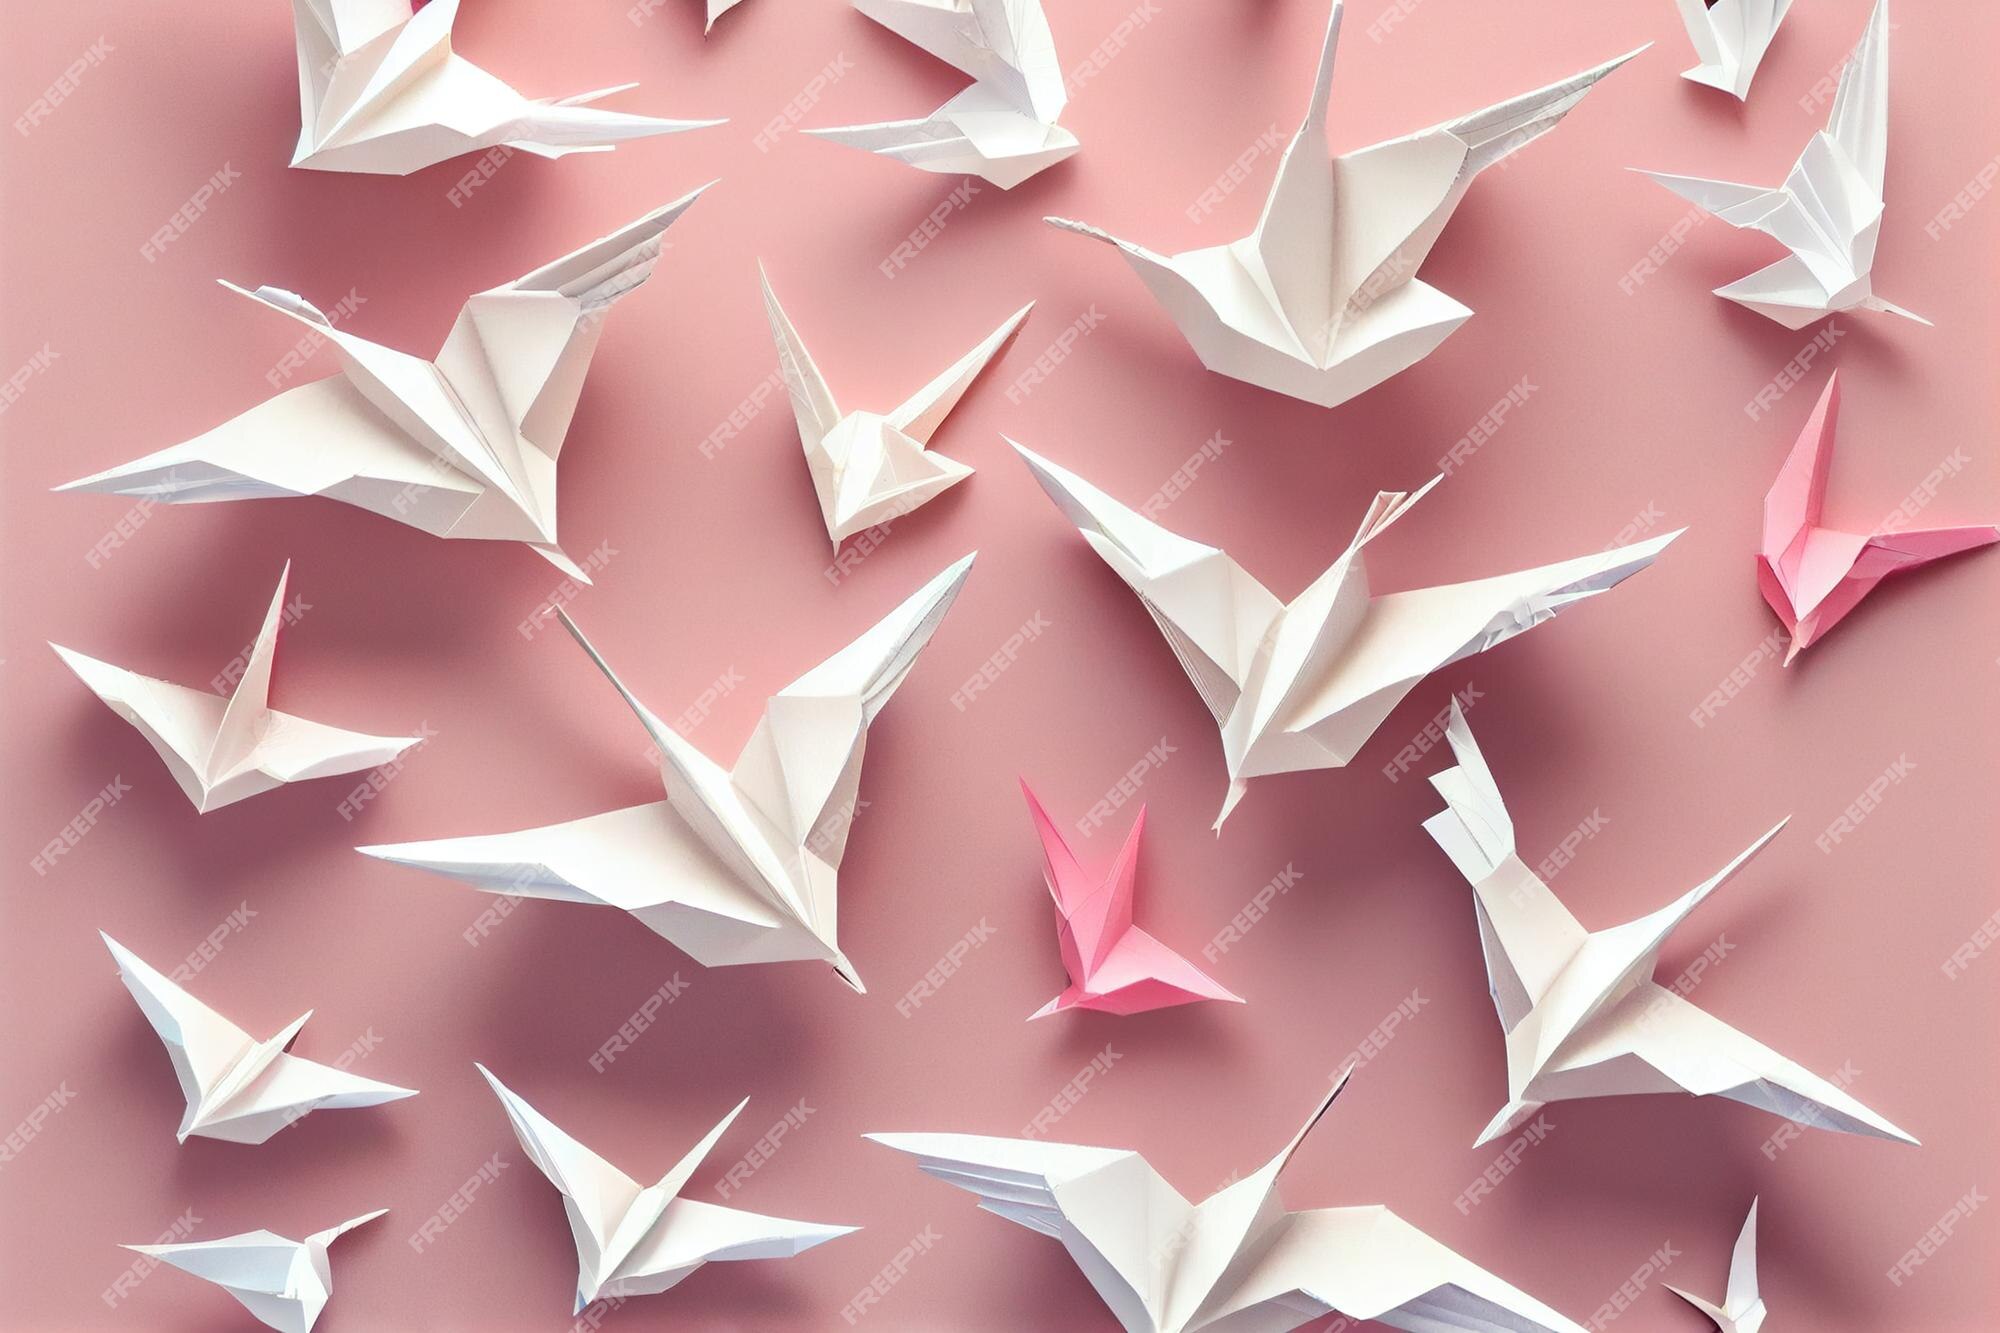 Pink/Red Origami Paper Crane Photographic Print for Sale by White